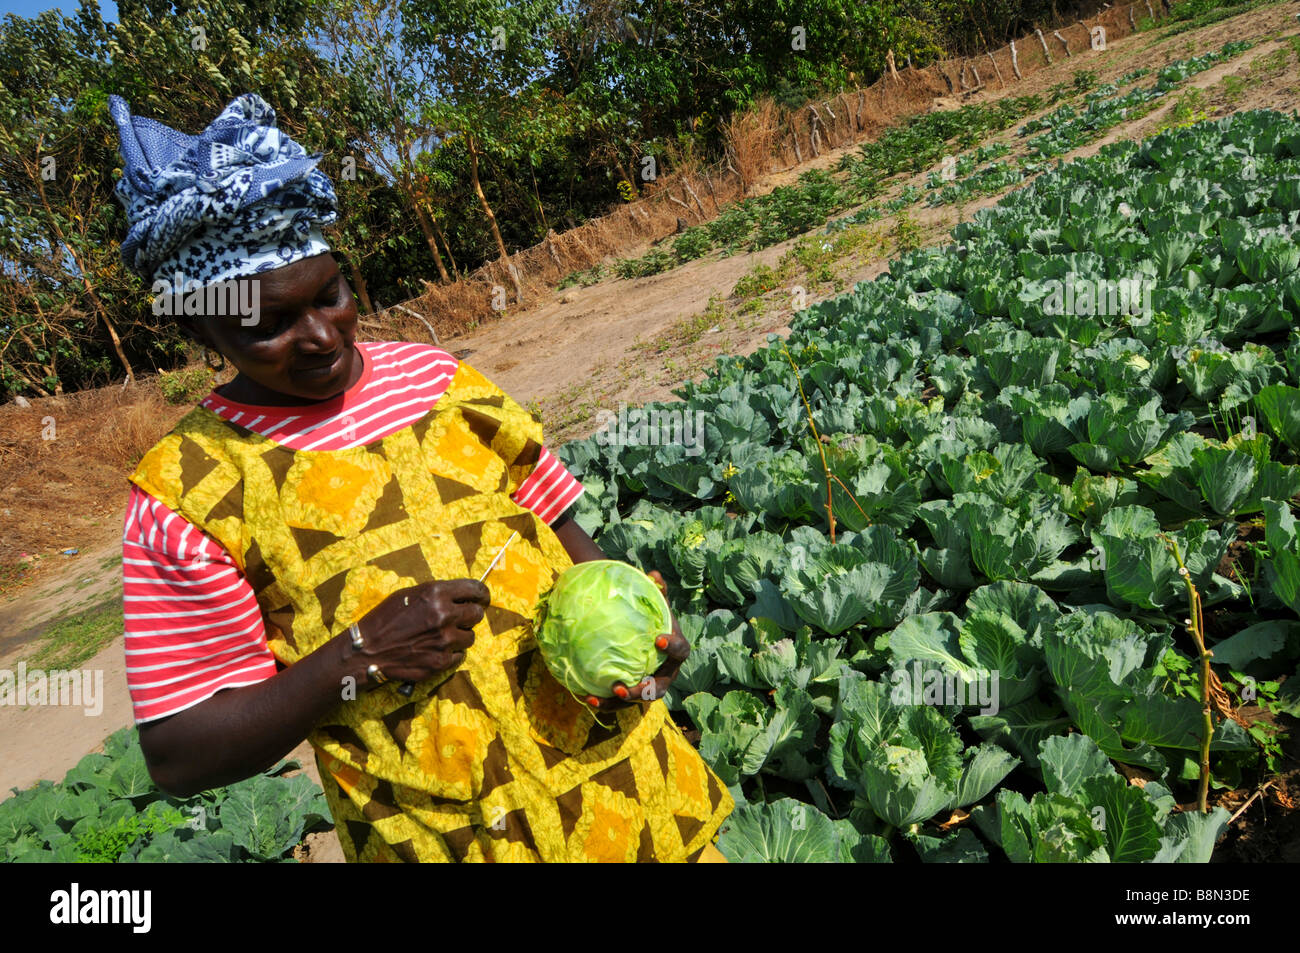 Woman tending to her crops, The Gambia, West Africa Stock Photo